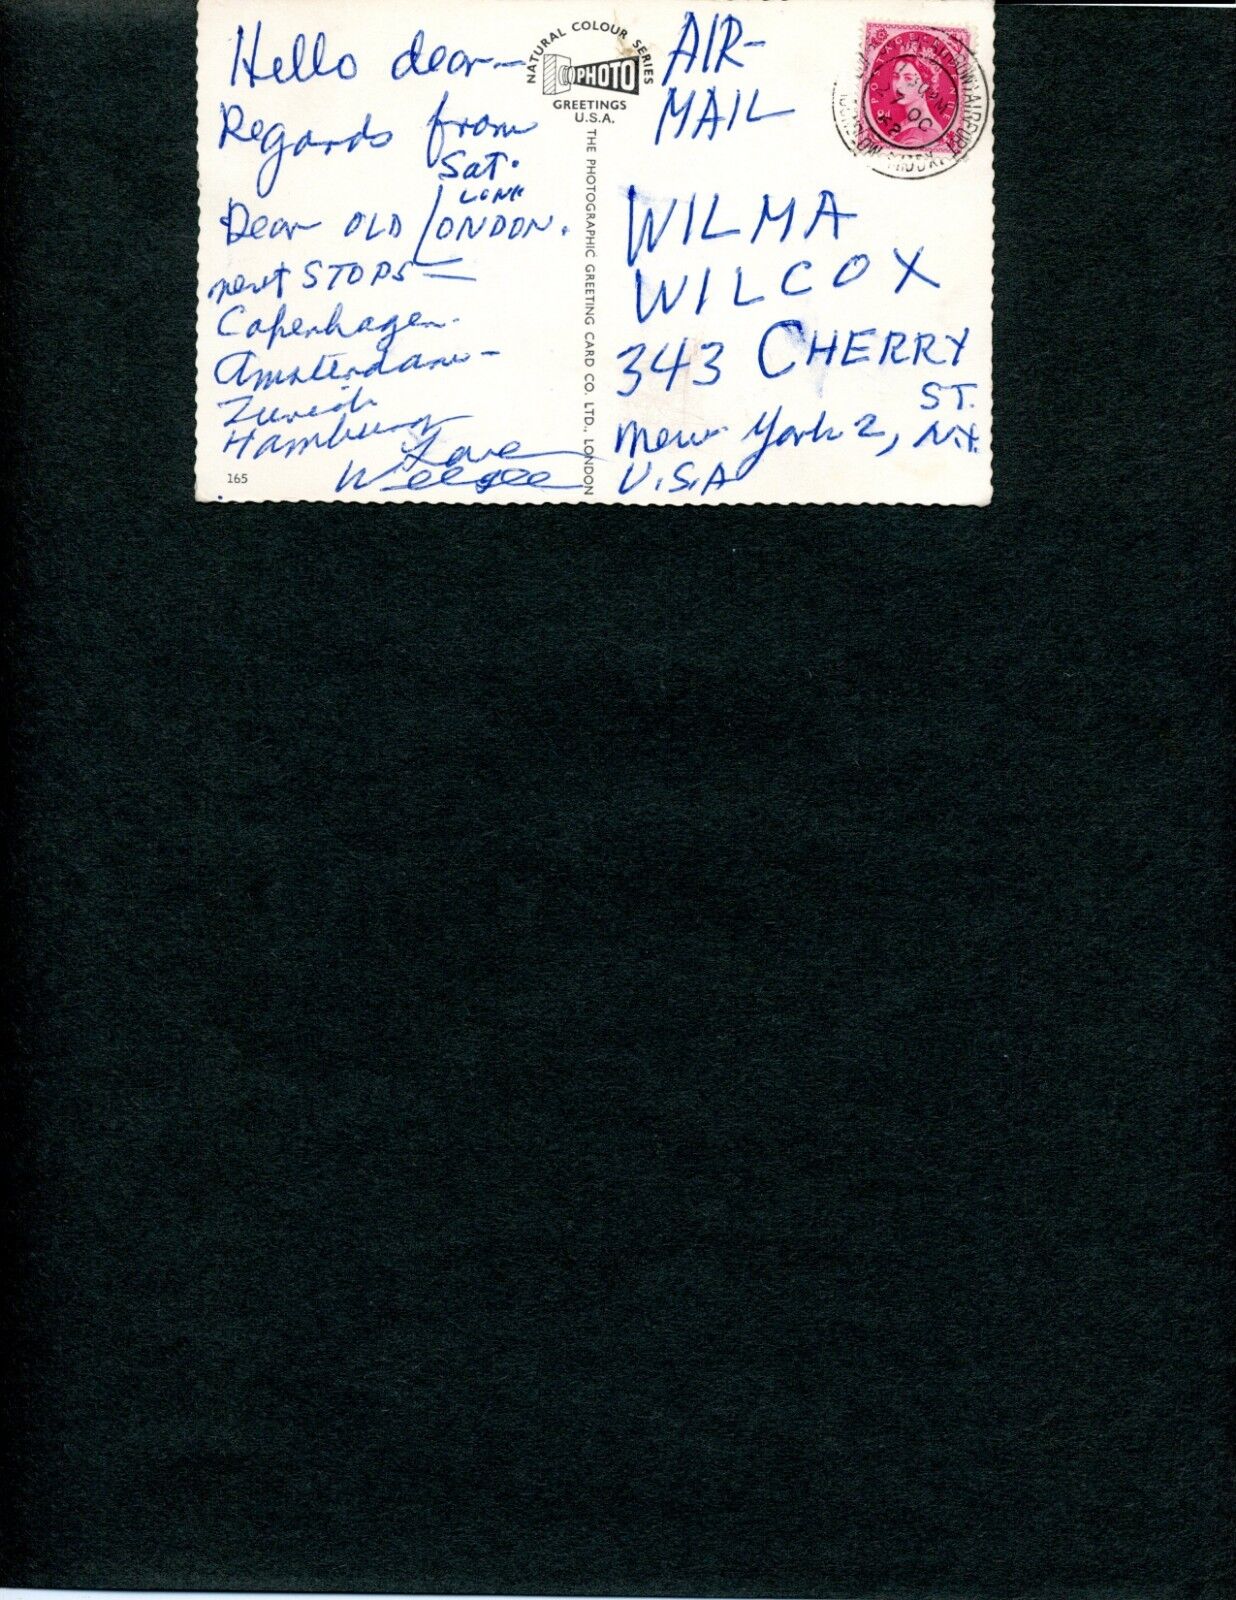 WEEGEE (ARTHUR FELLIG) HANDWRITTEN NOTE SIGNED ON PHOTOGRAPHY TRAVELS IN EUROPE 